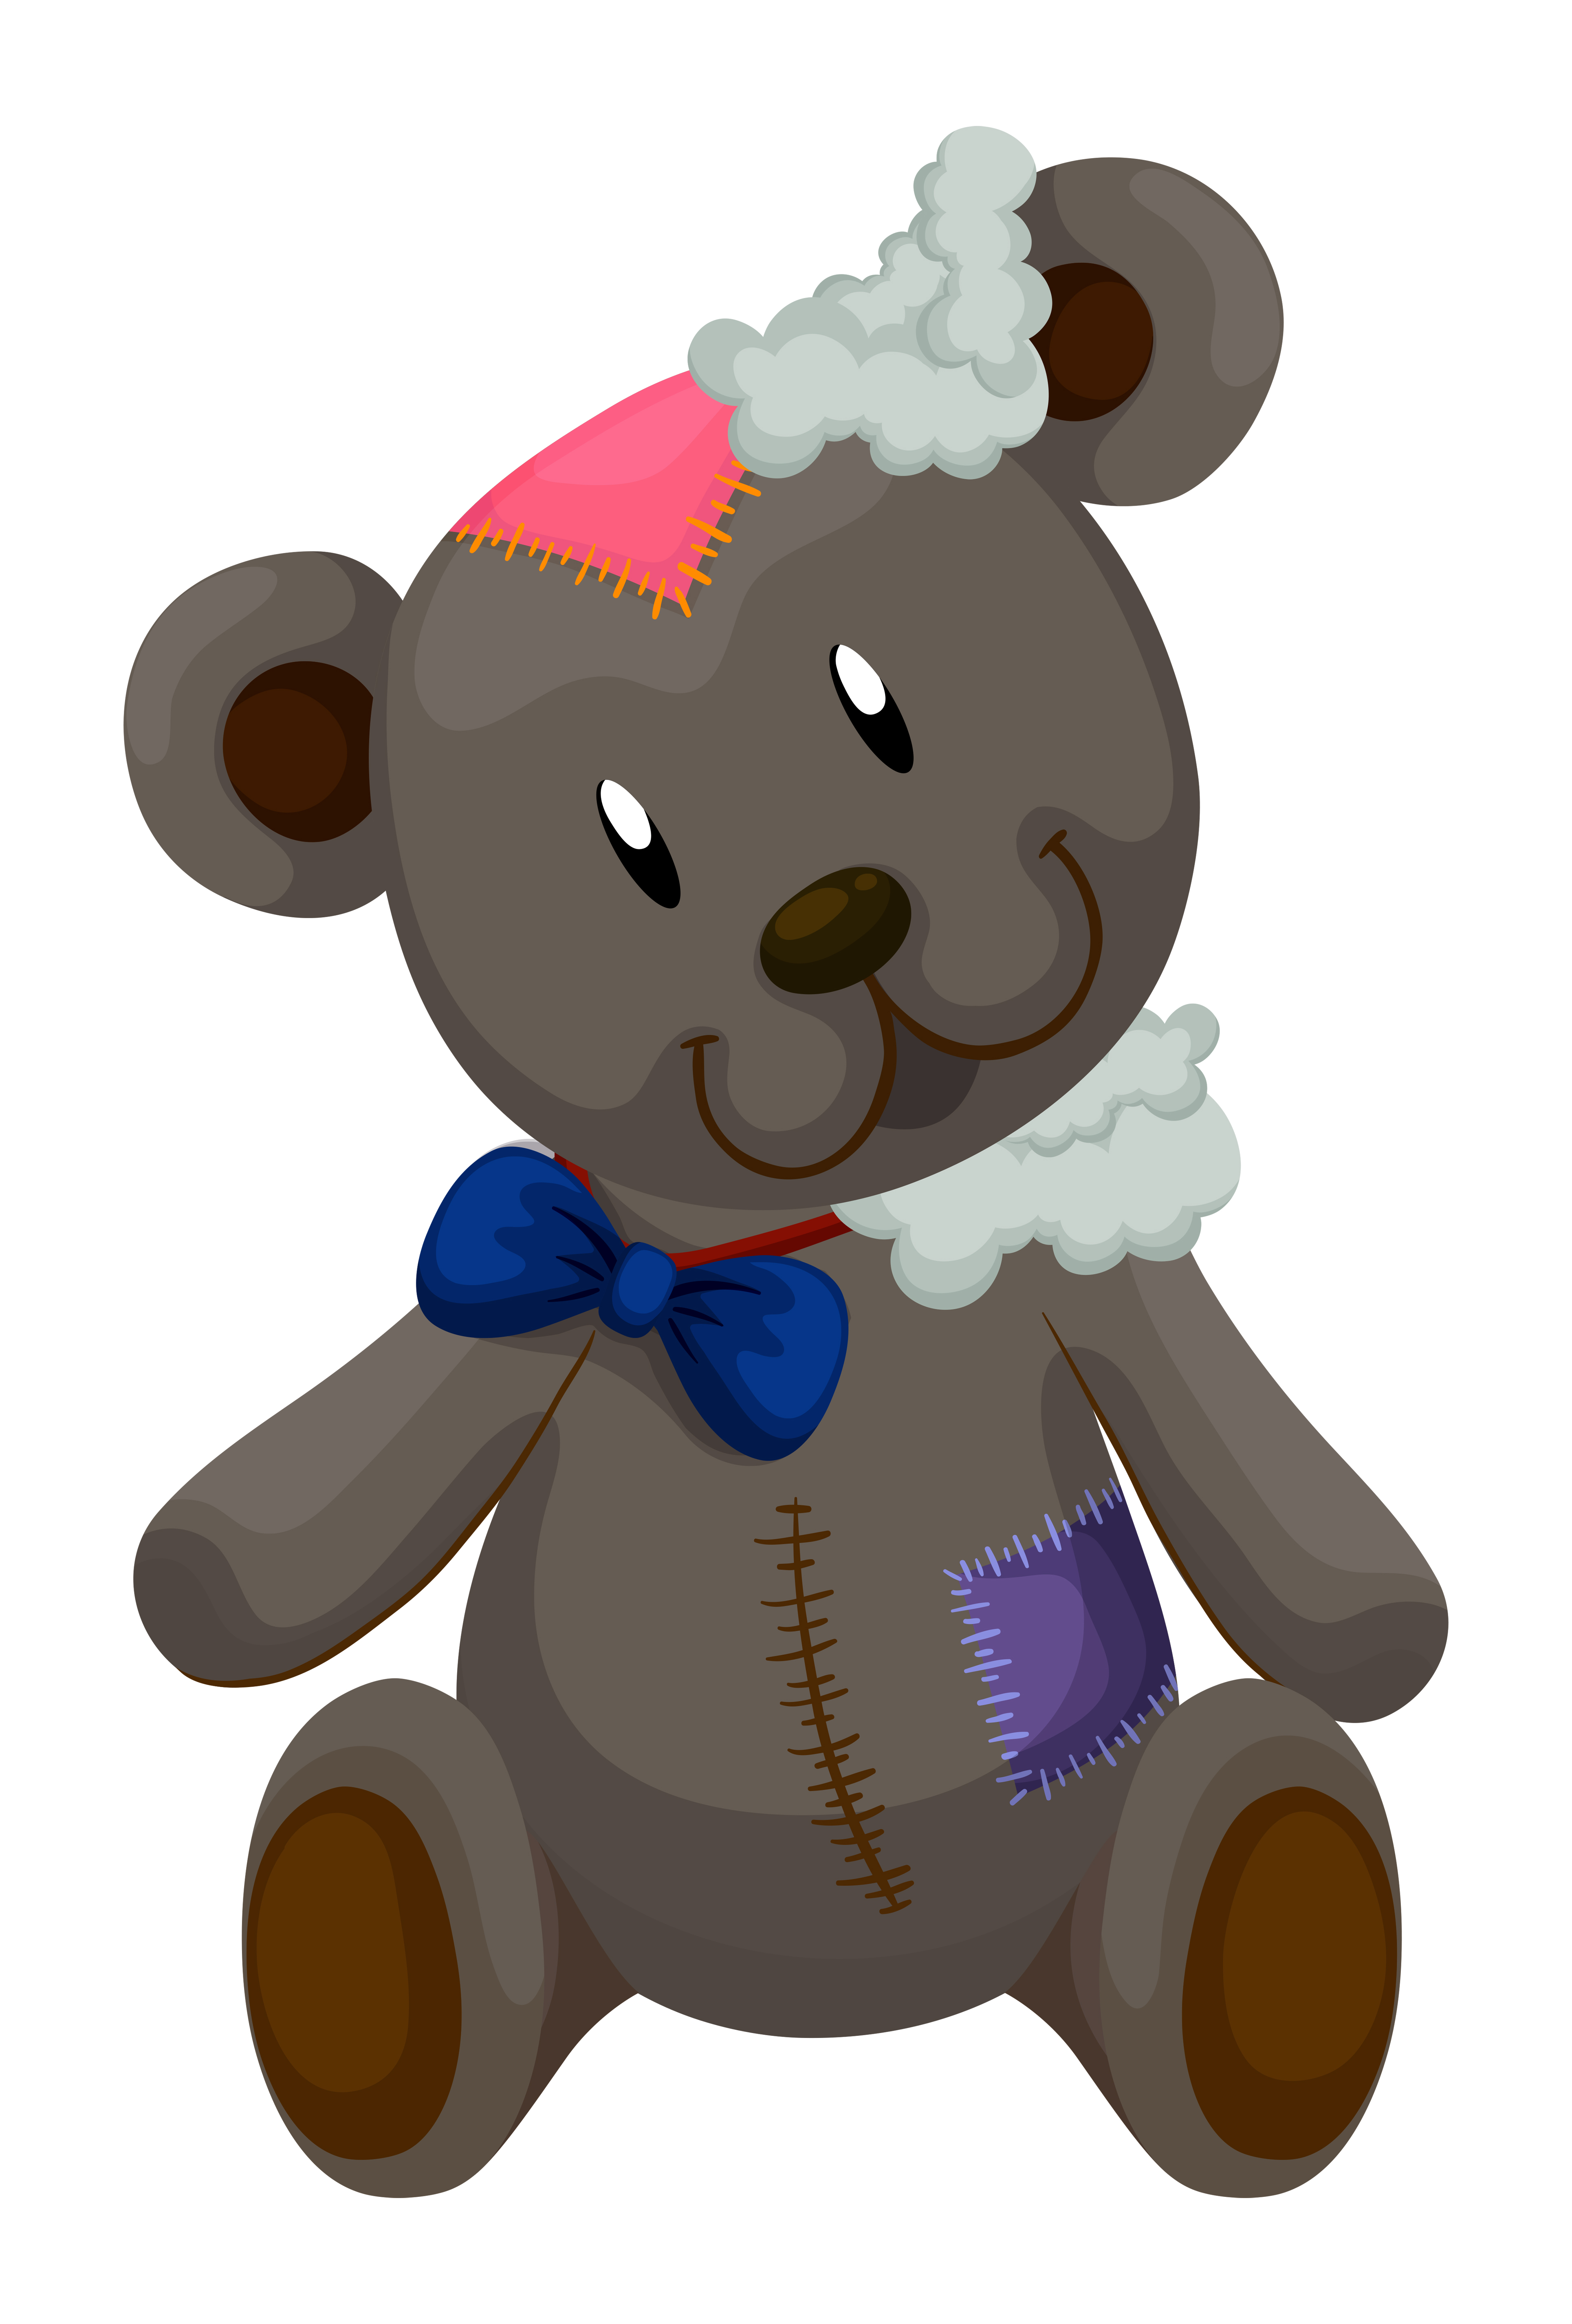 Old teddy bear with patches - Download Free Vectors ...